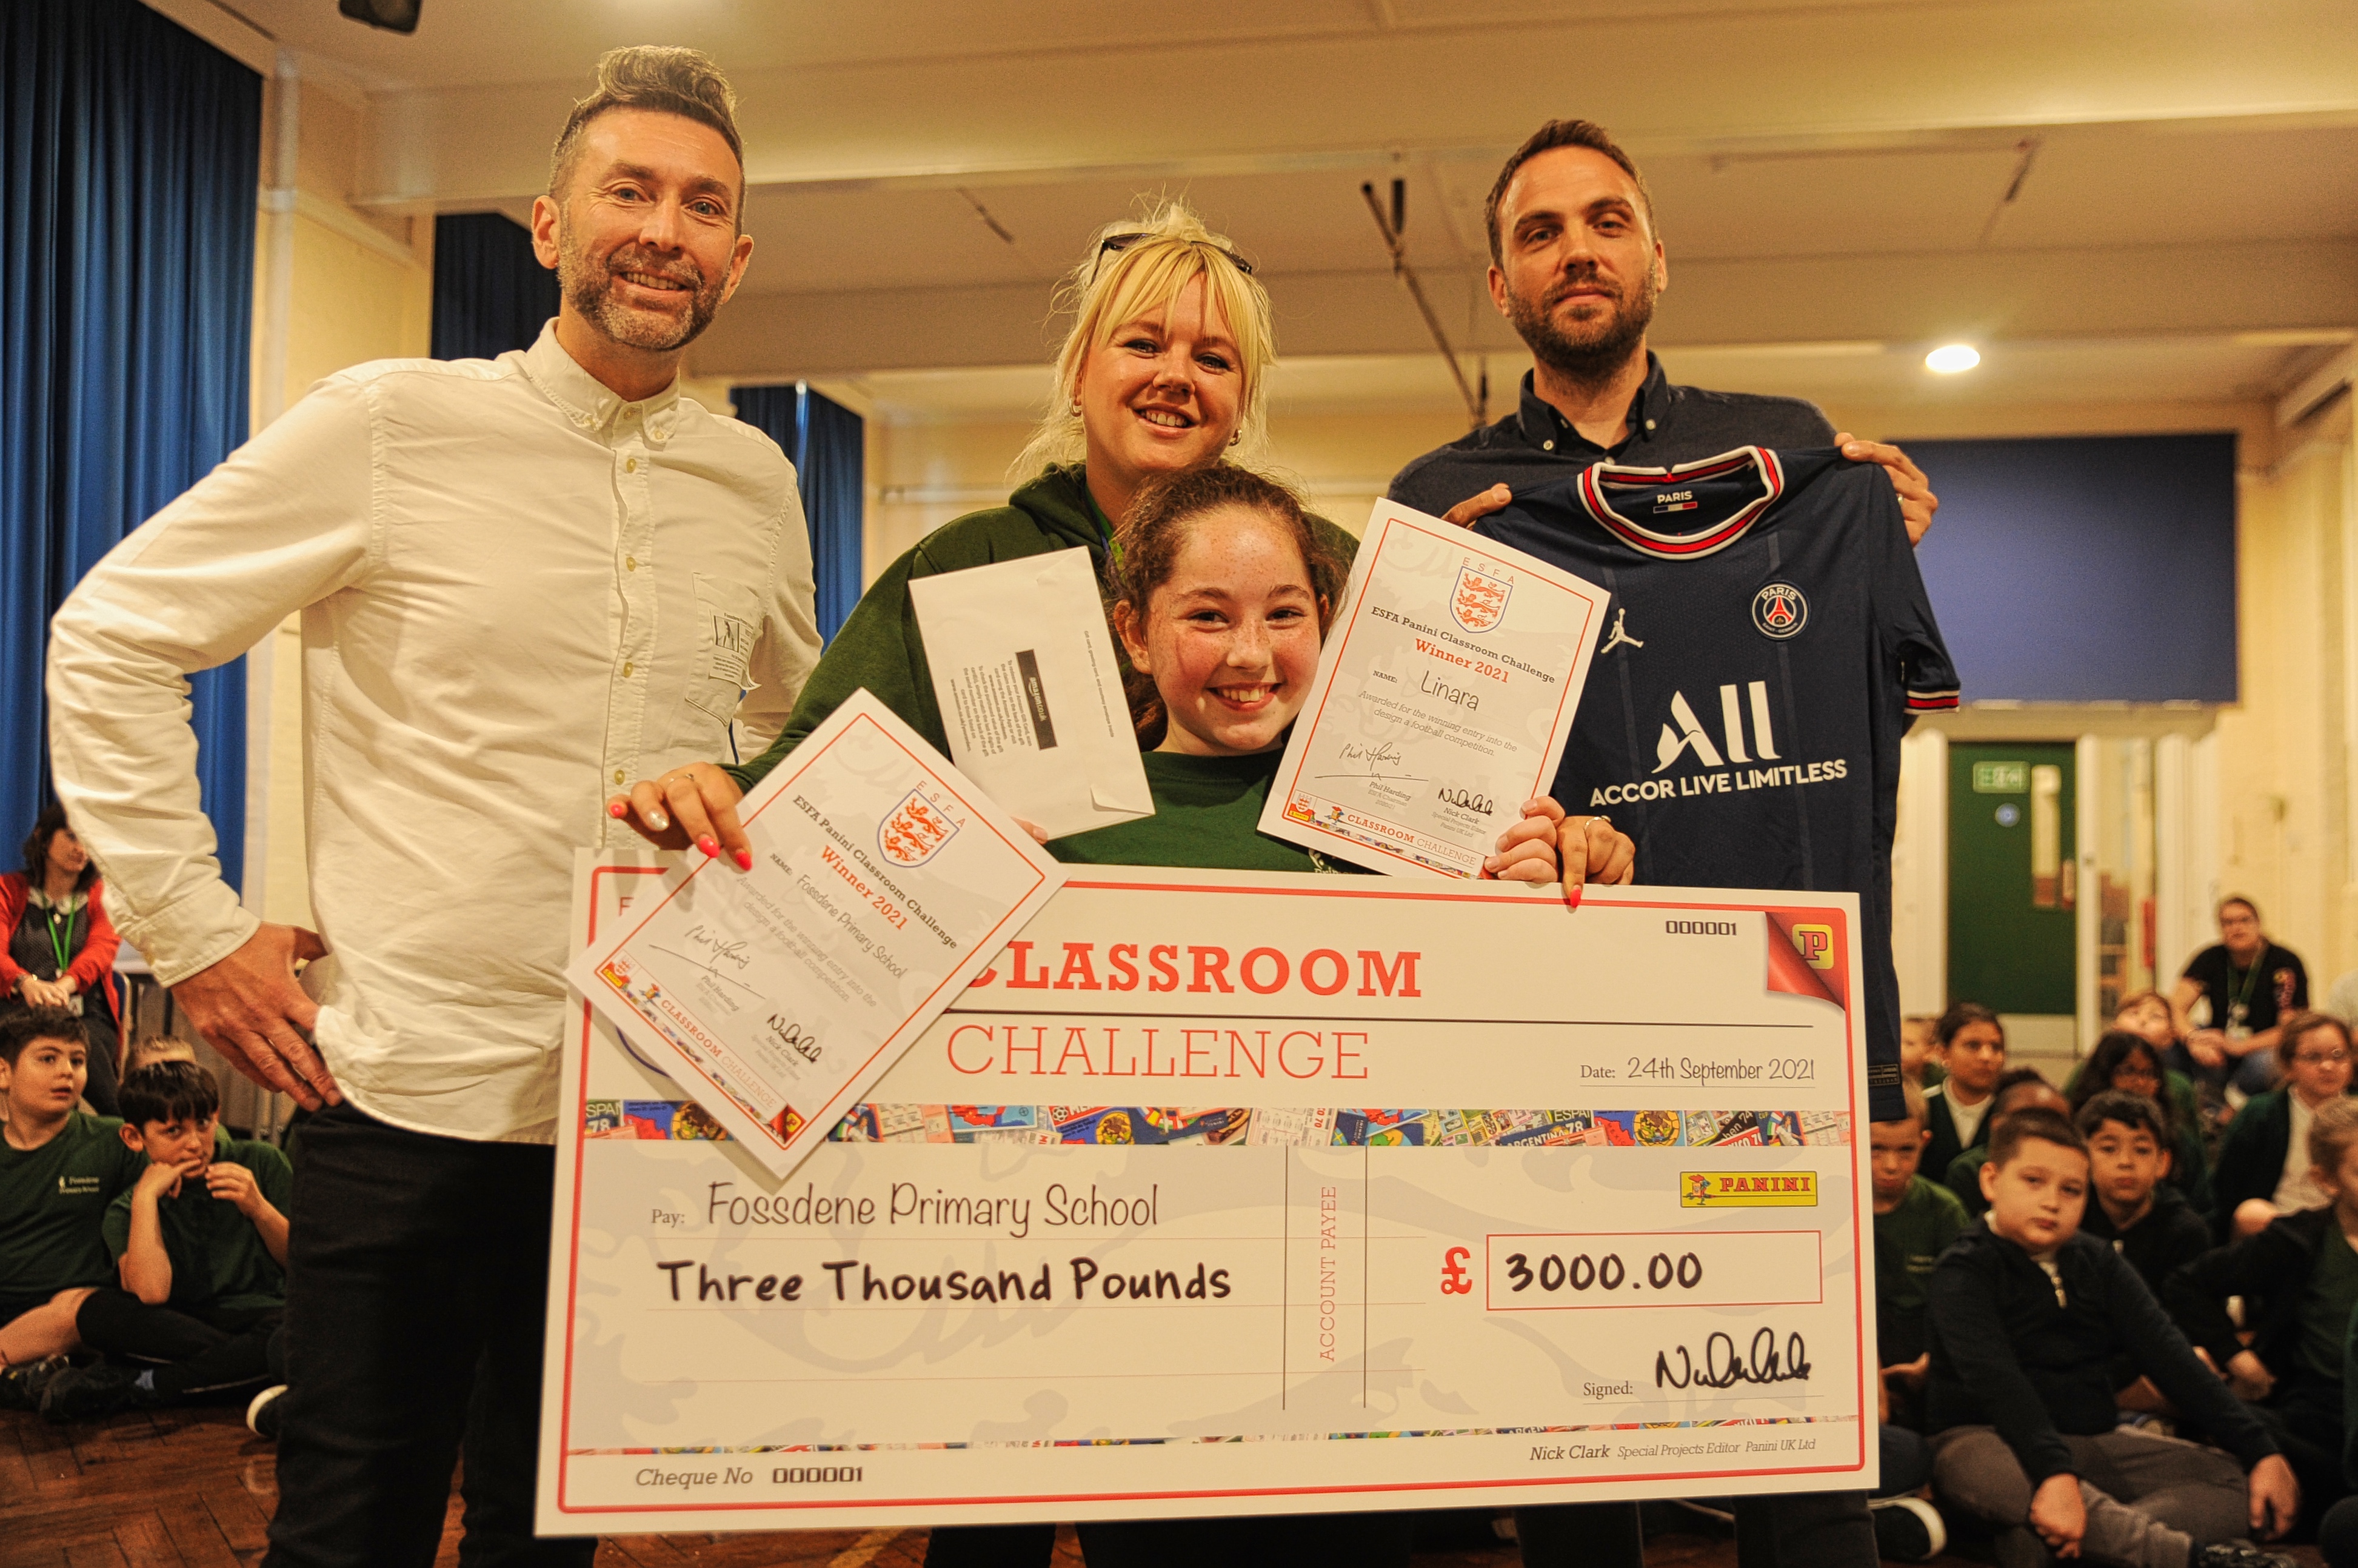 Former Classroom Challenge winners from 2021, posing with a giant cheque